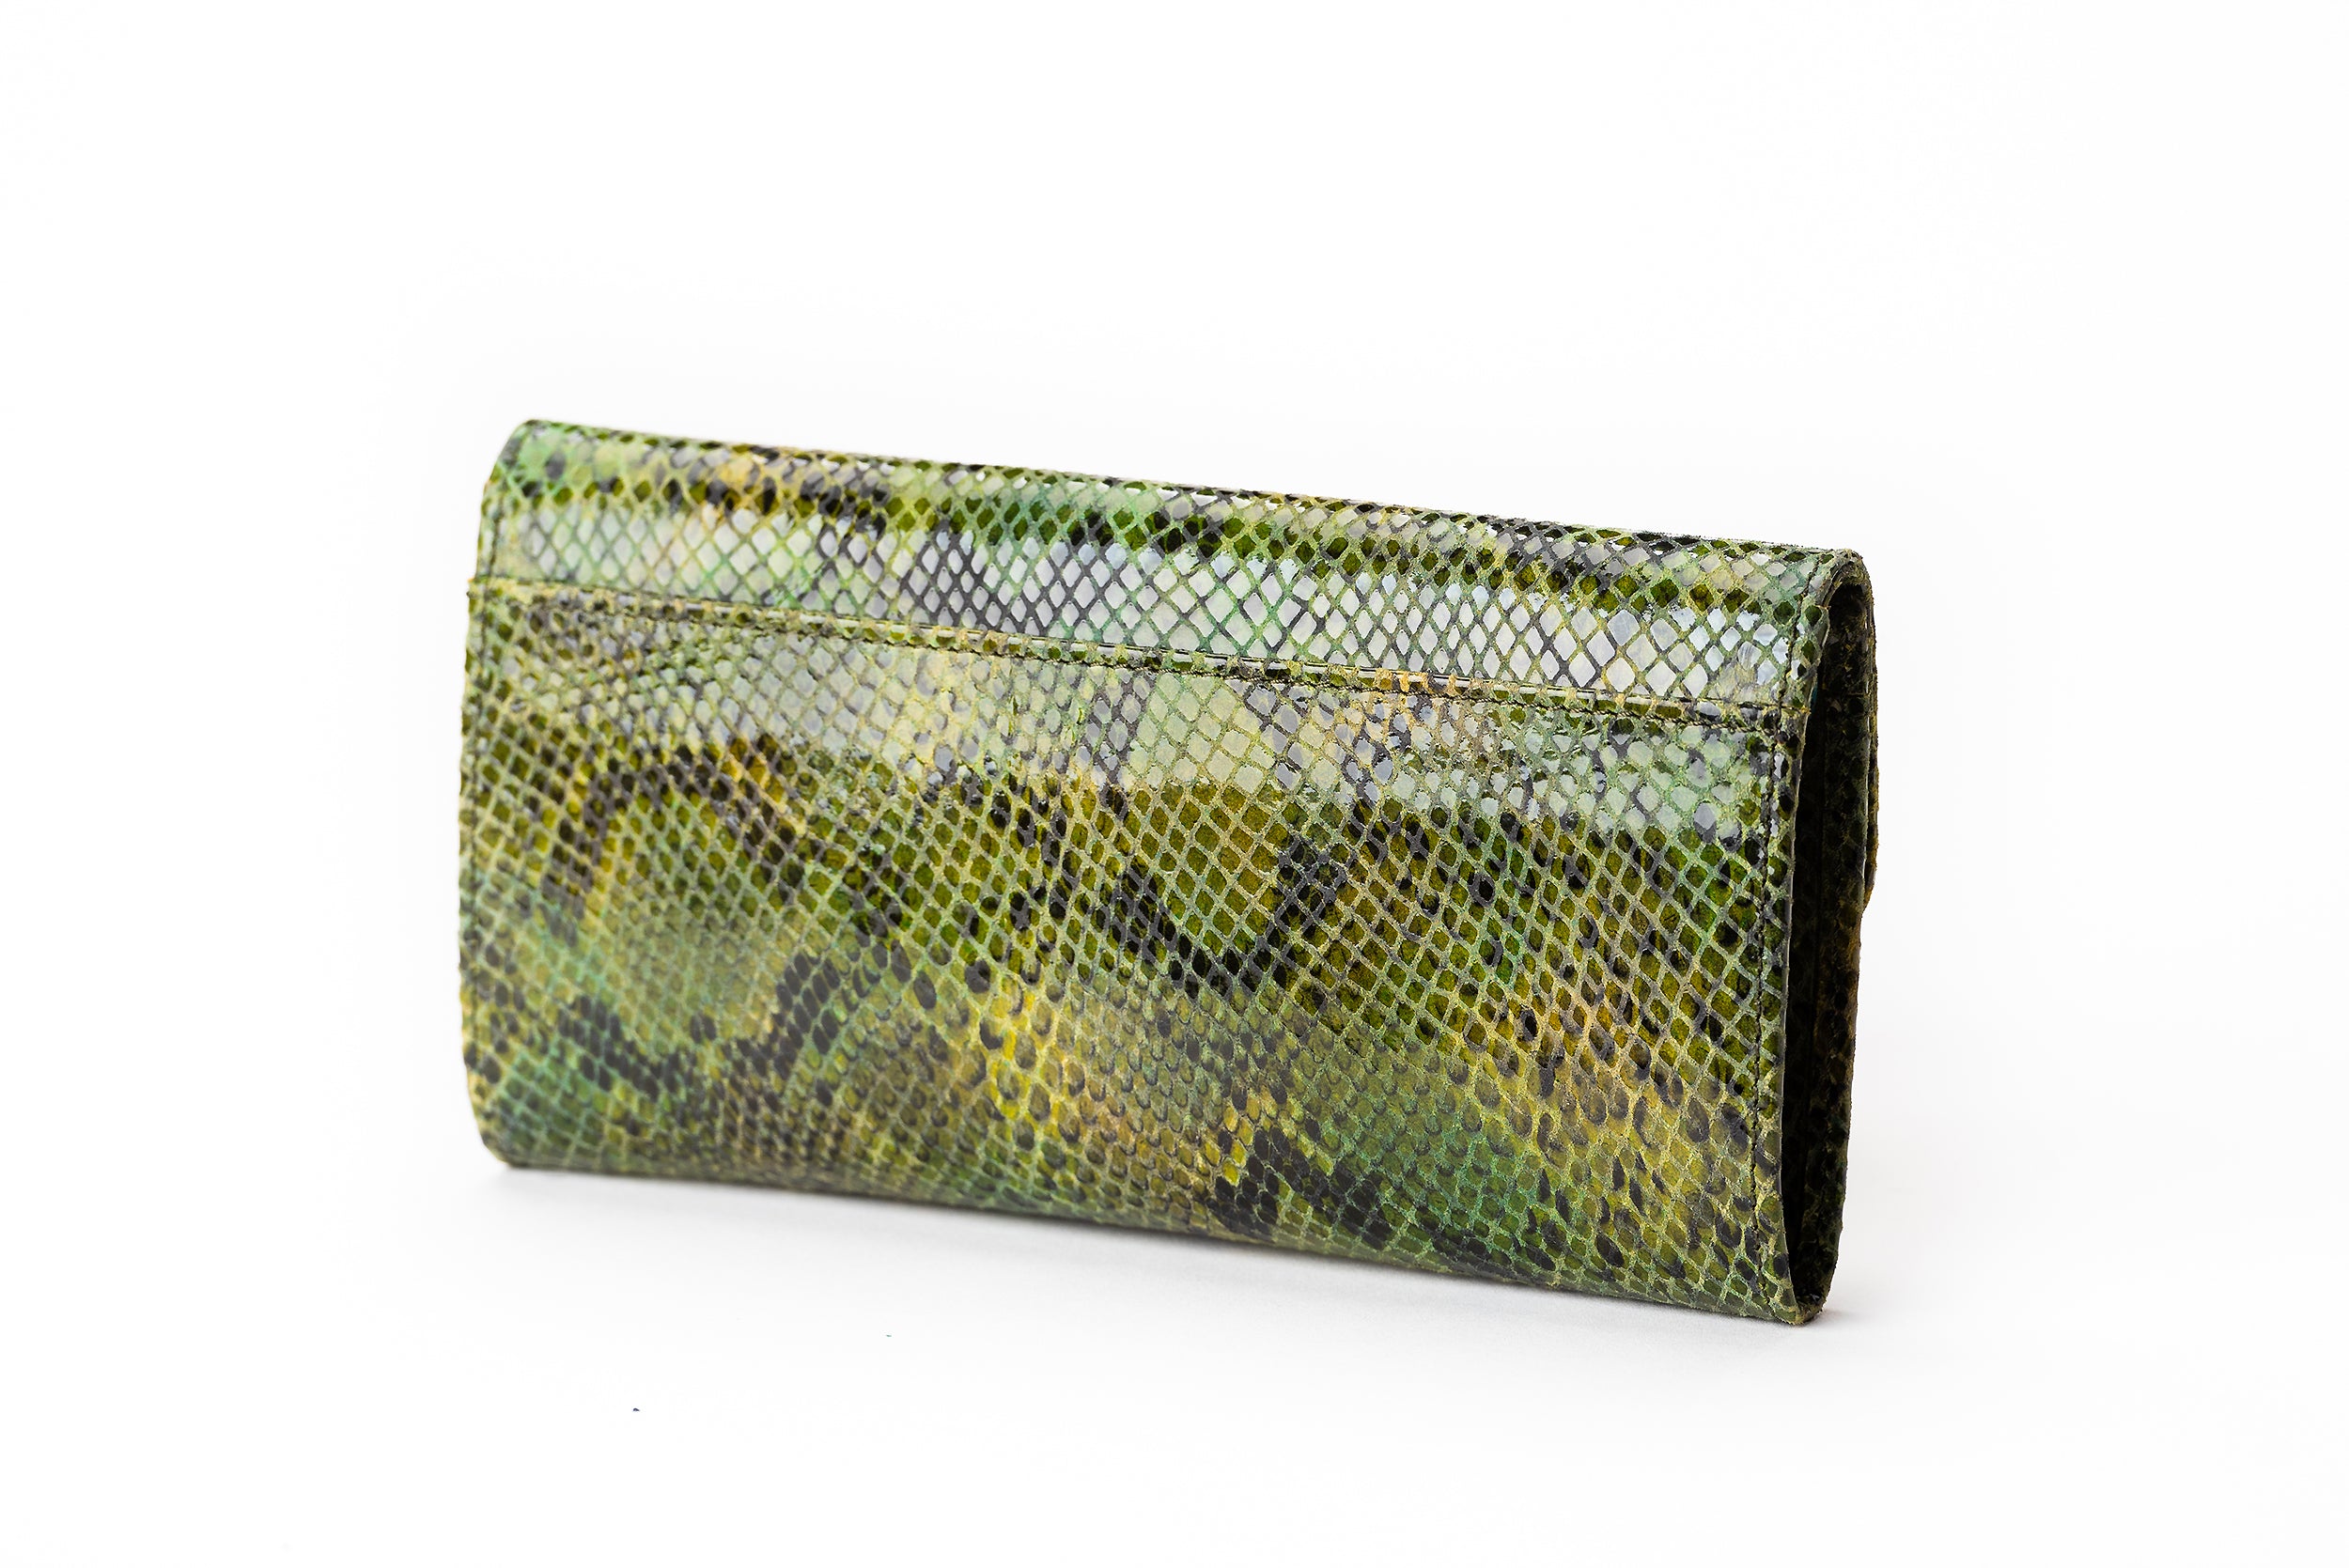 The Sultan Wallet - Printed Green